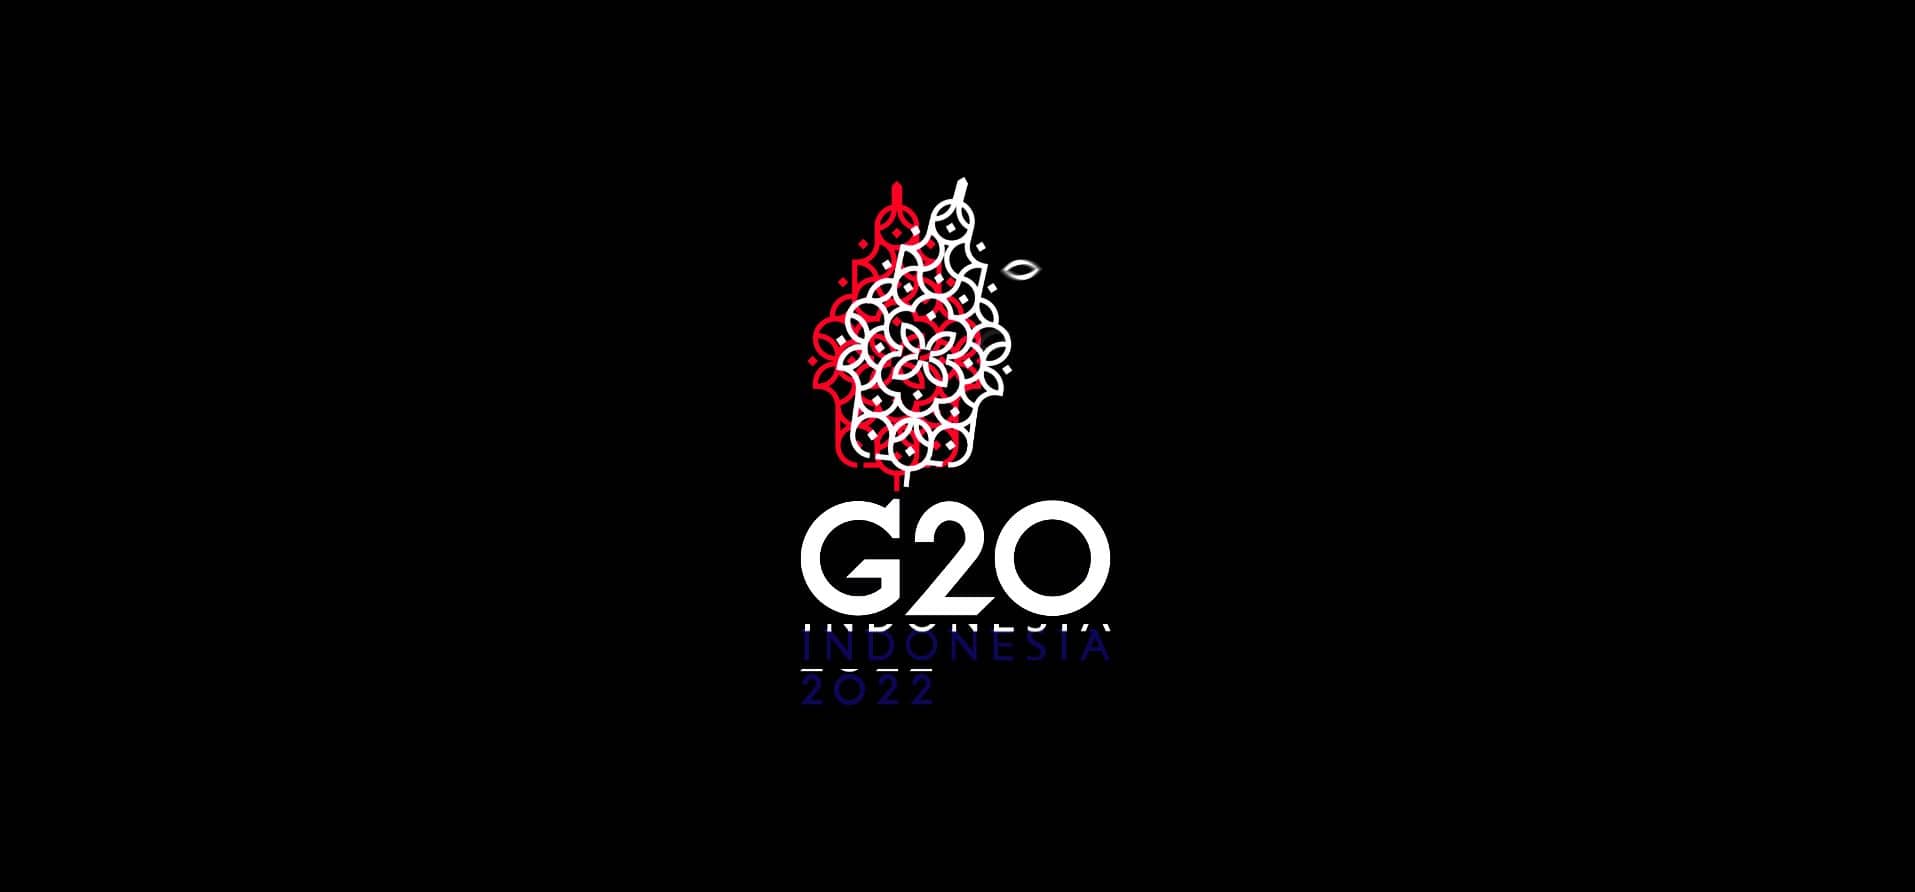 G20 Indonesia Presidency Motion Graphic Assets